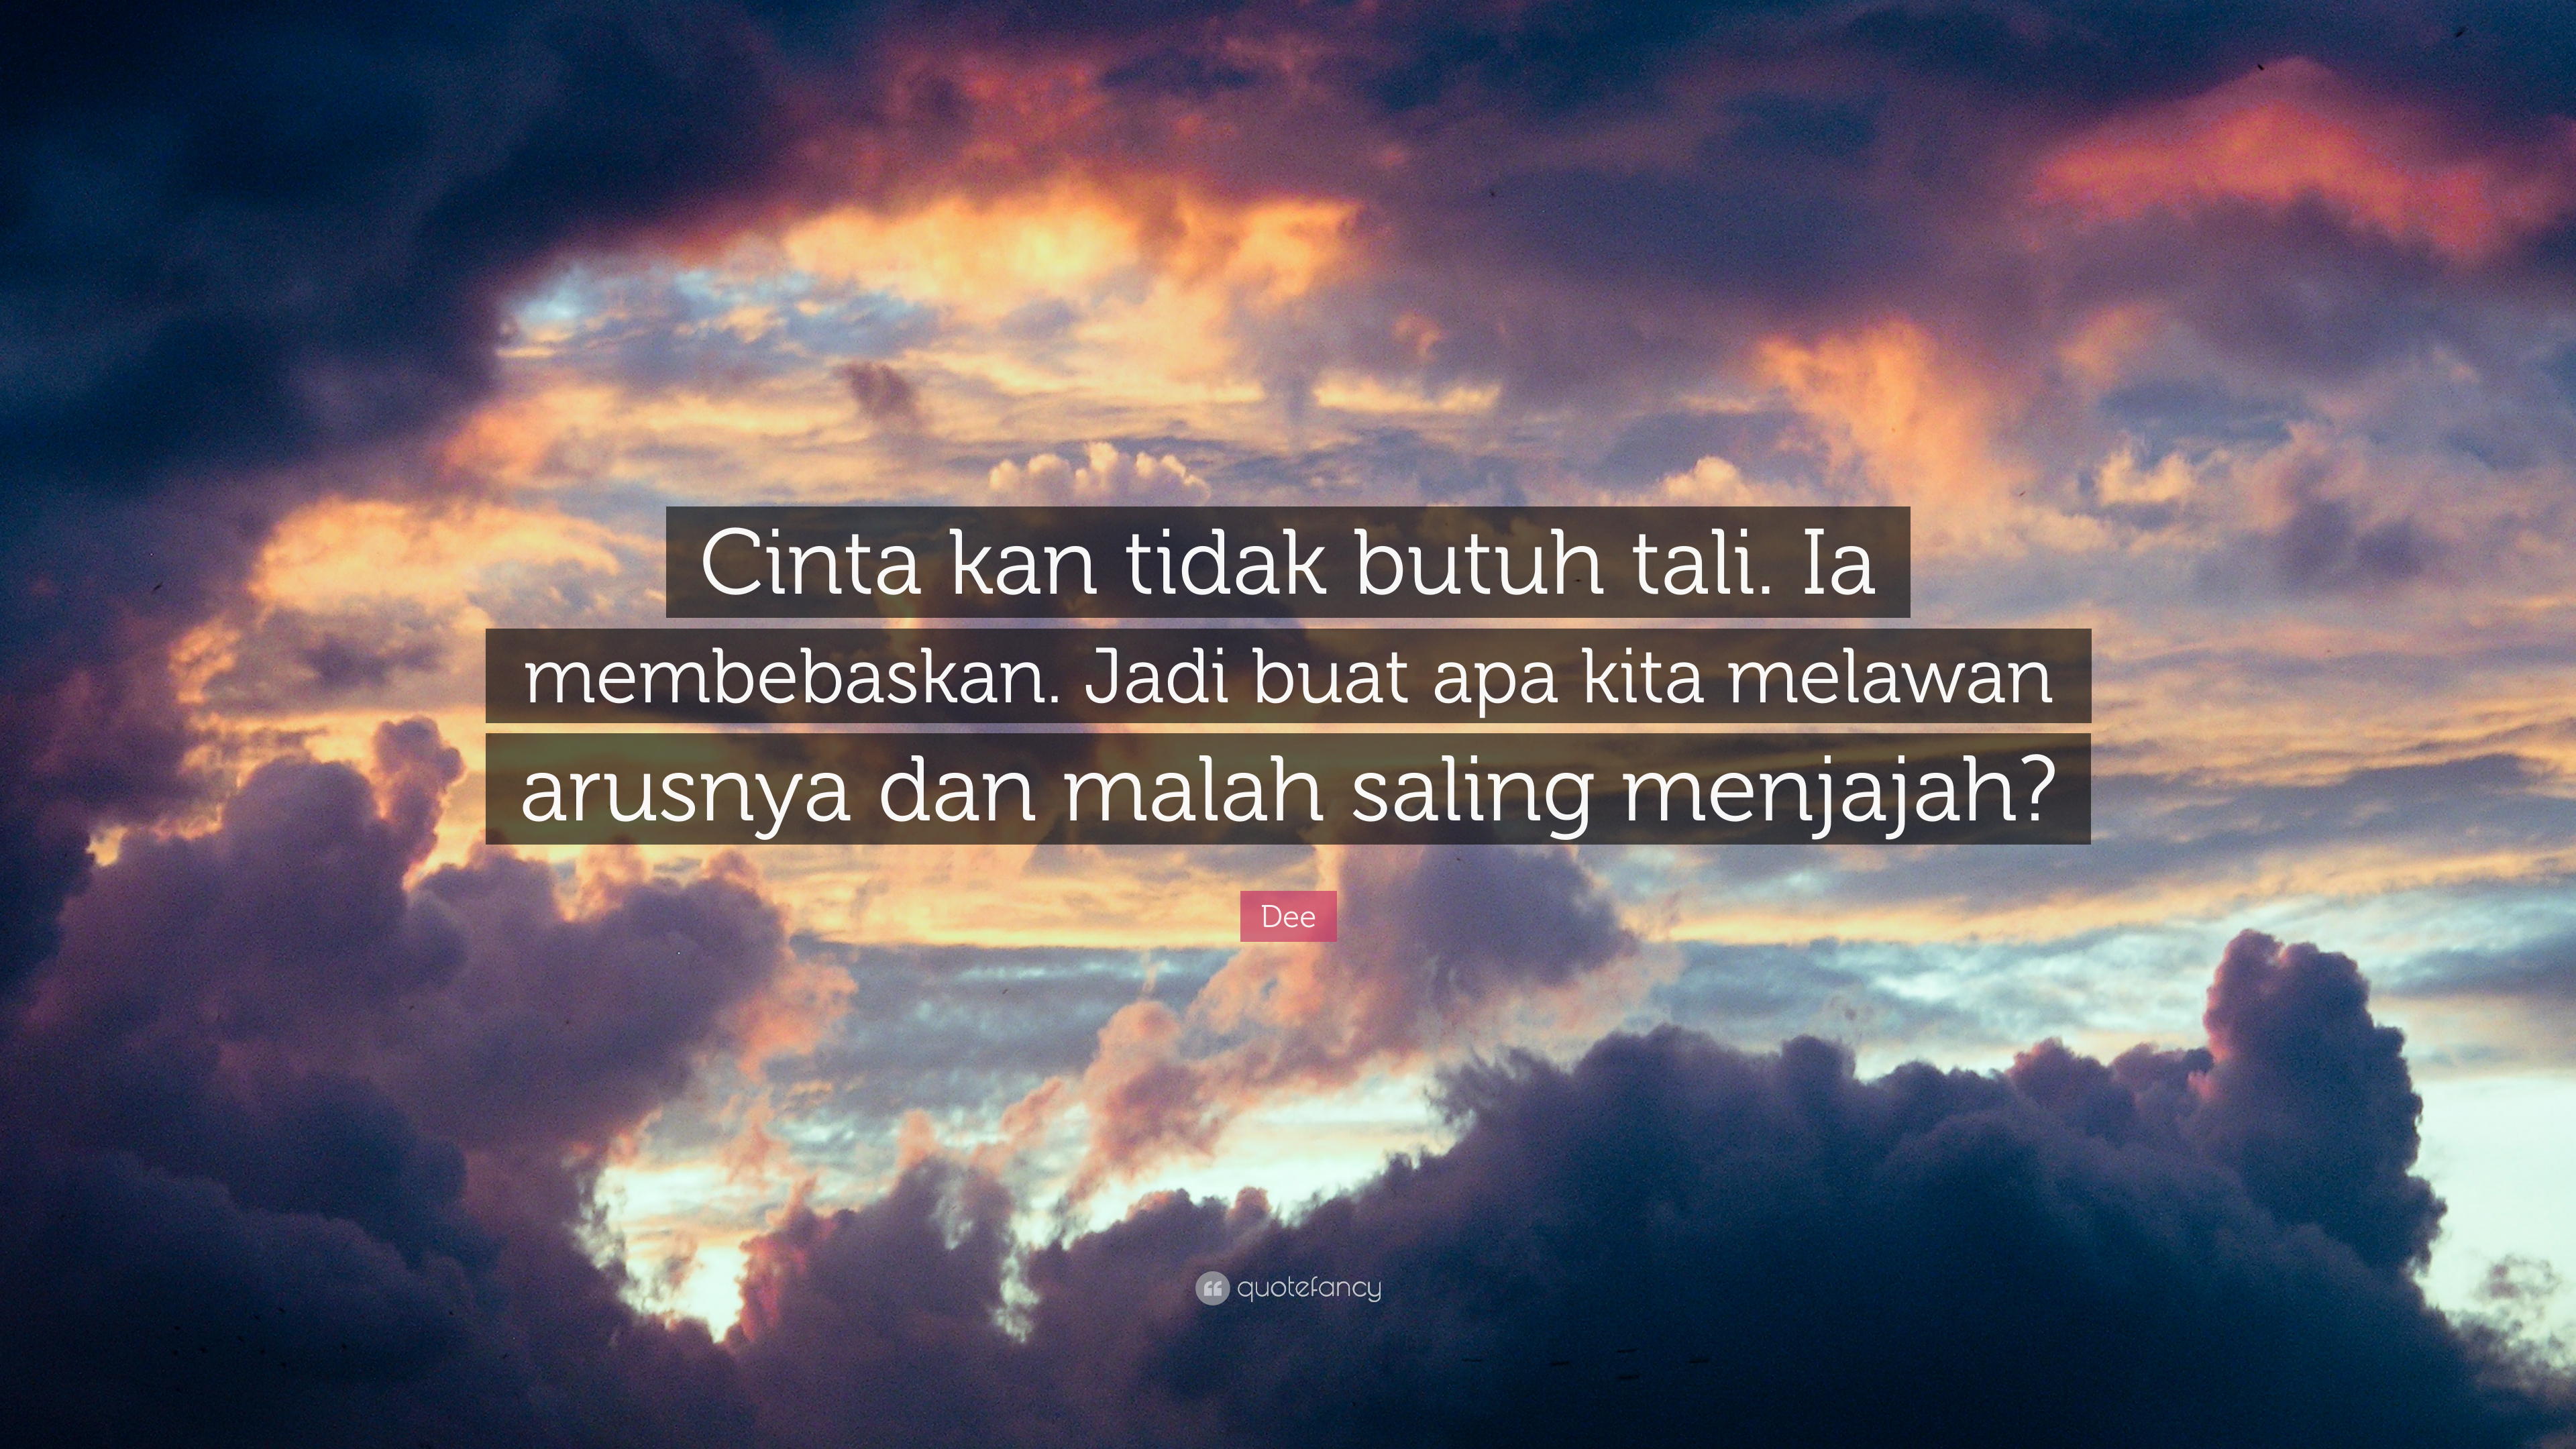 “cinta Kan Tidak Butuh Tali - Only Know One Thing , HD Wallpaper & Backgrounds